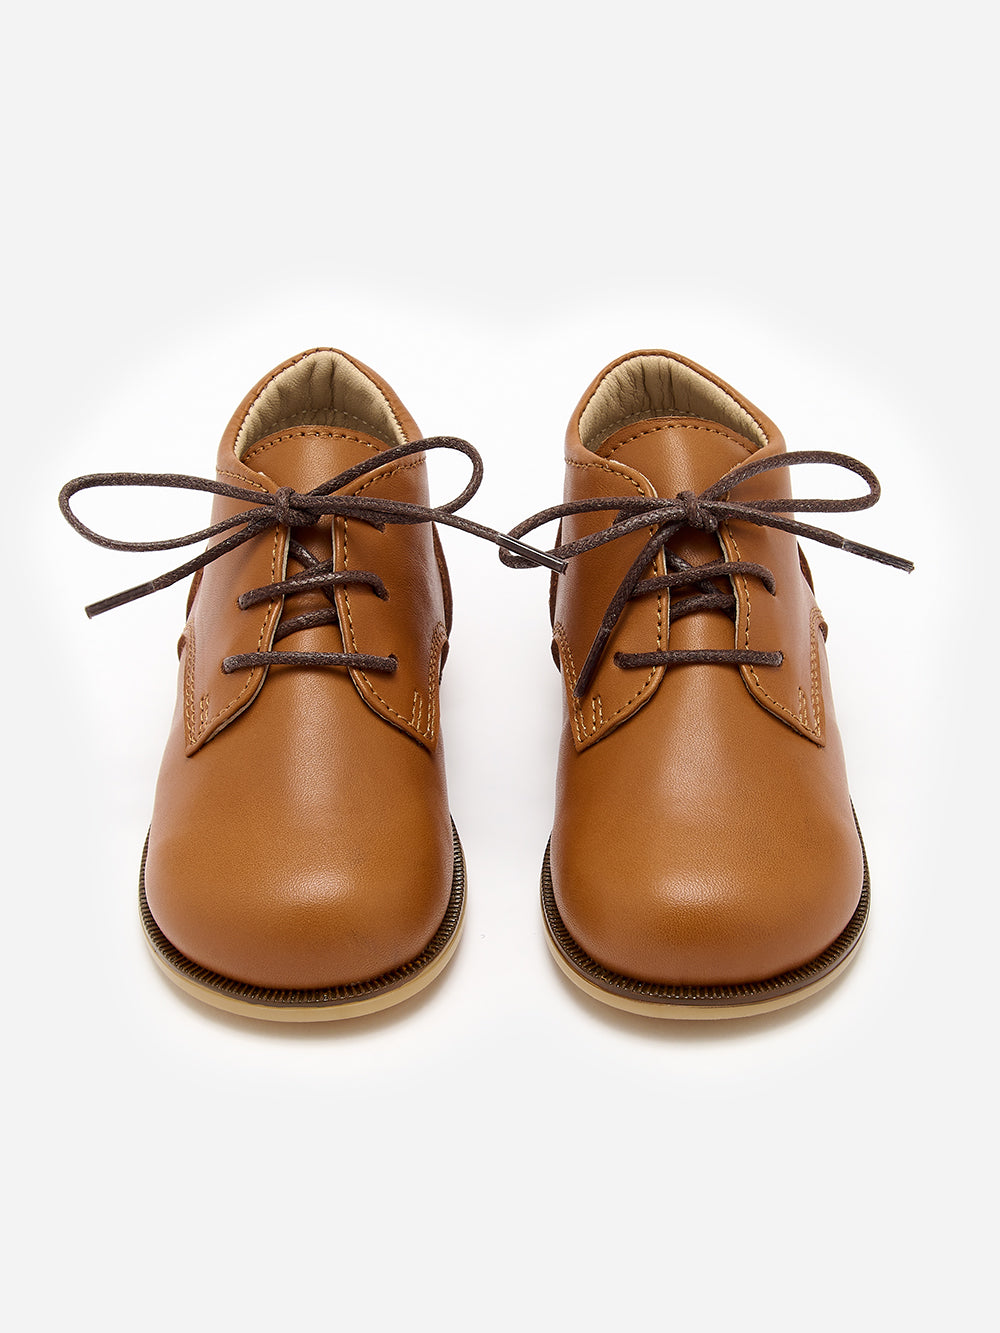 Brown Leather Toddler Boots